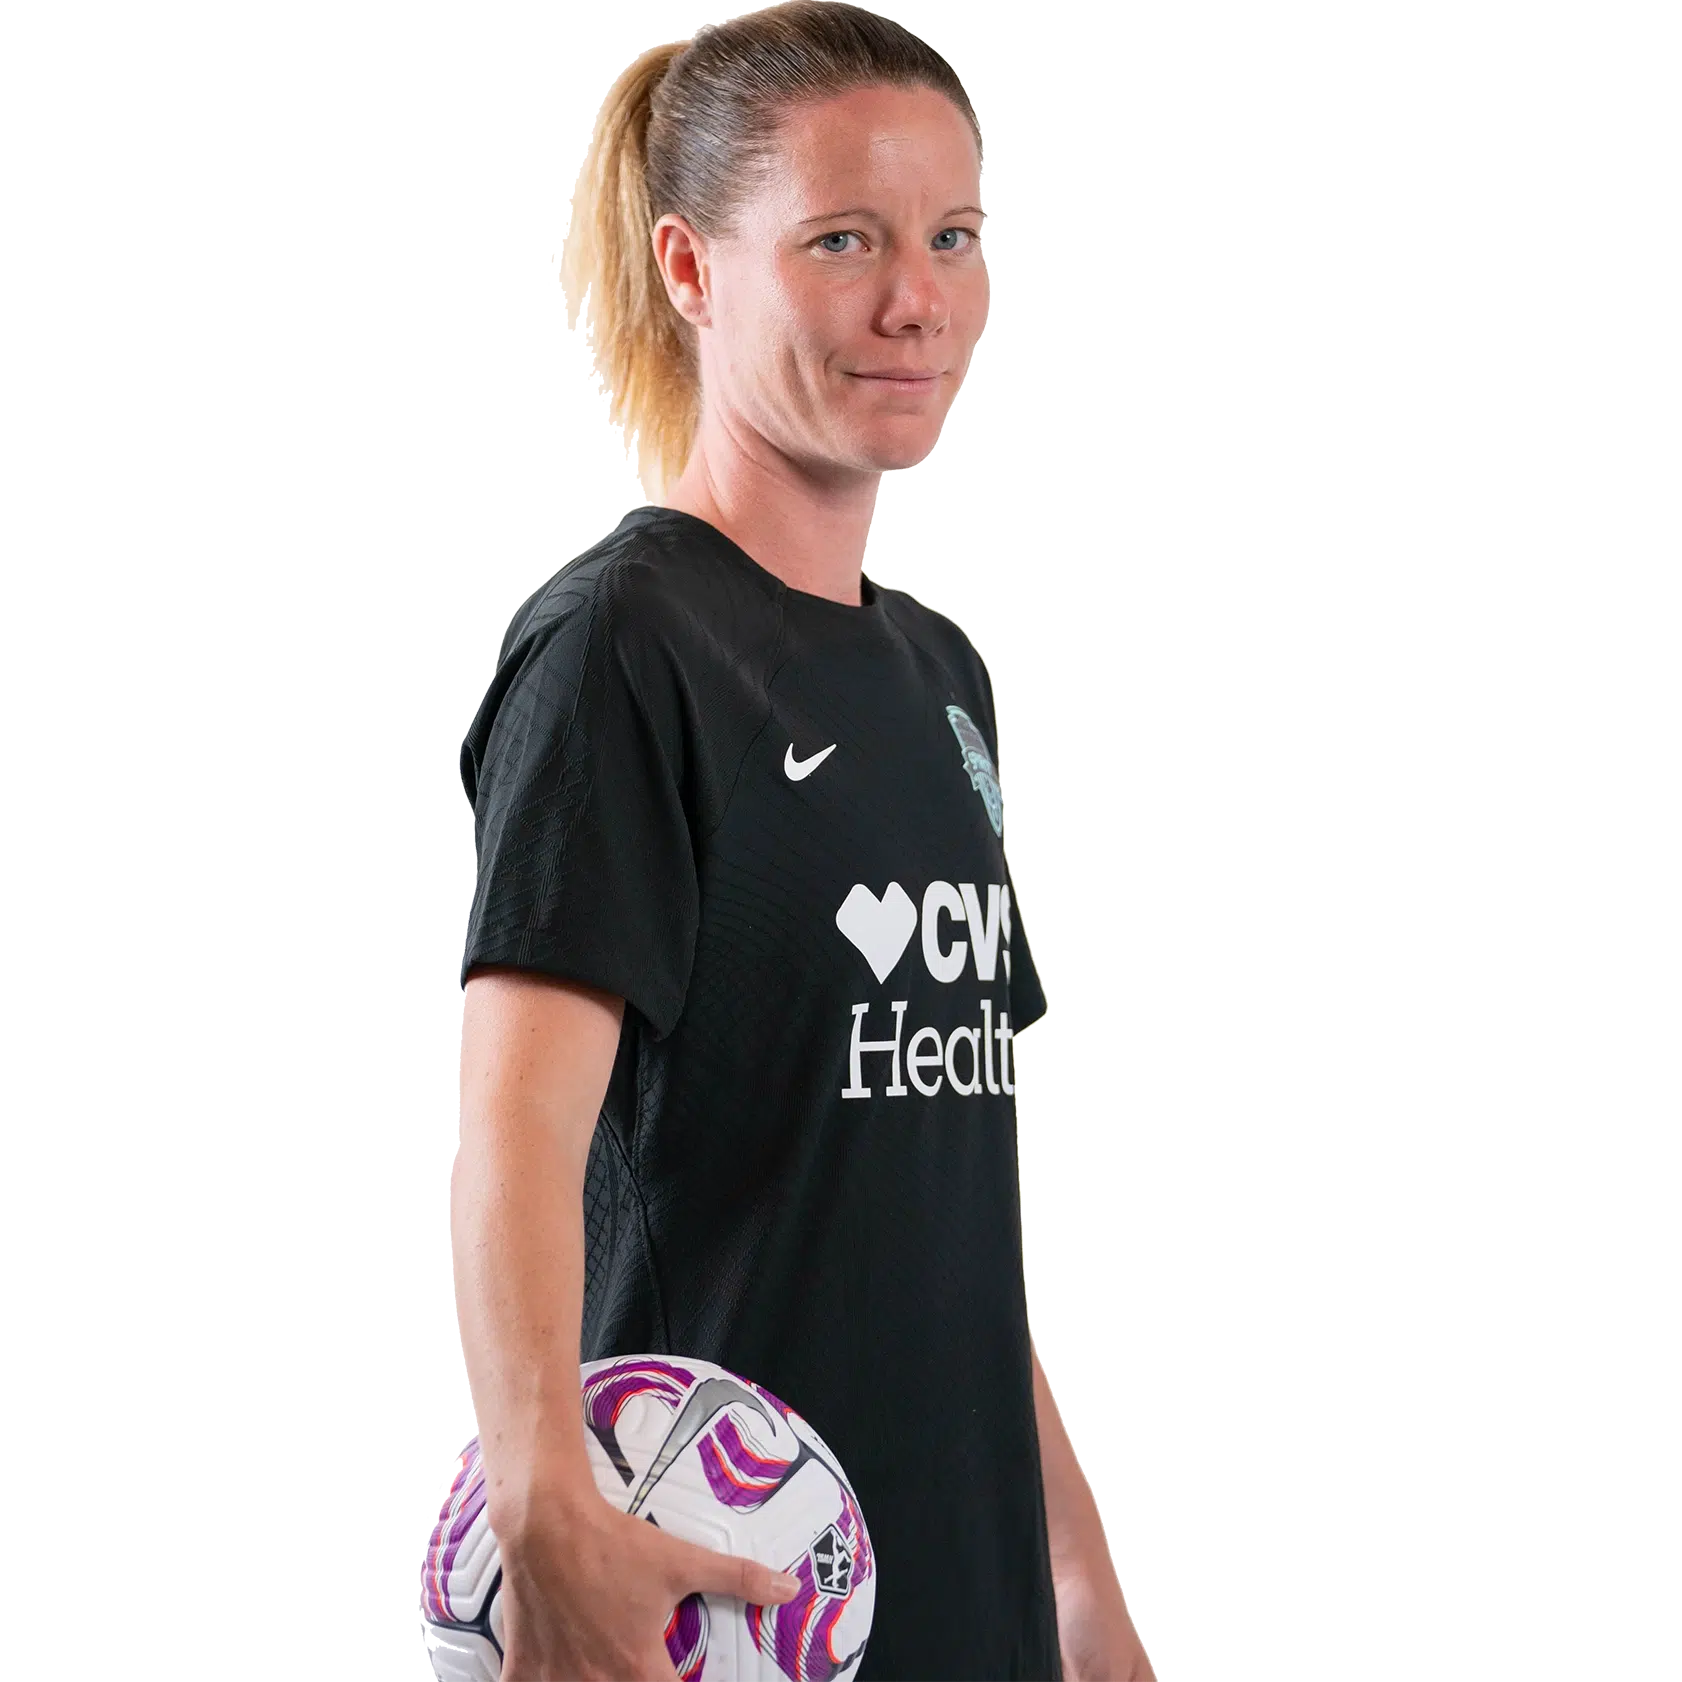 Annaig Butel holds a soccer ball in her left hand and smiles. She's wearing a black Spirit uniform with her hair in a ponytail.